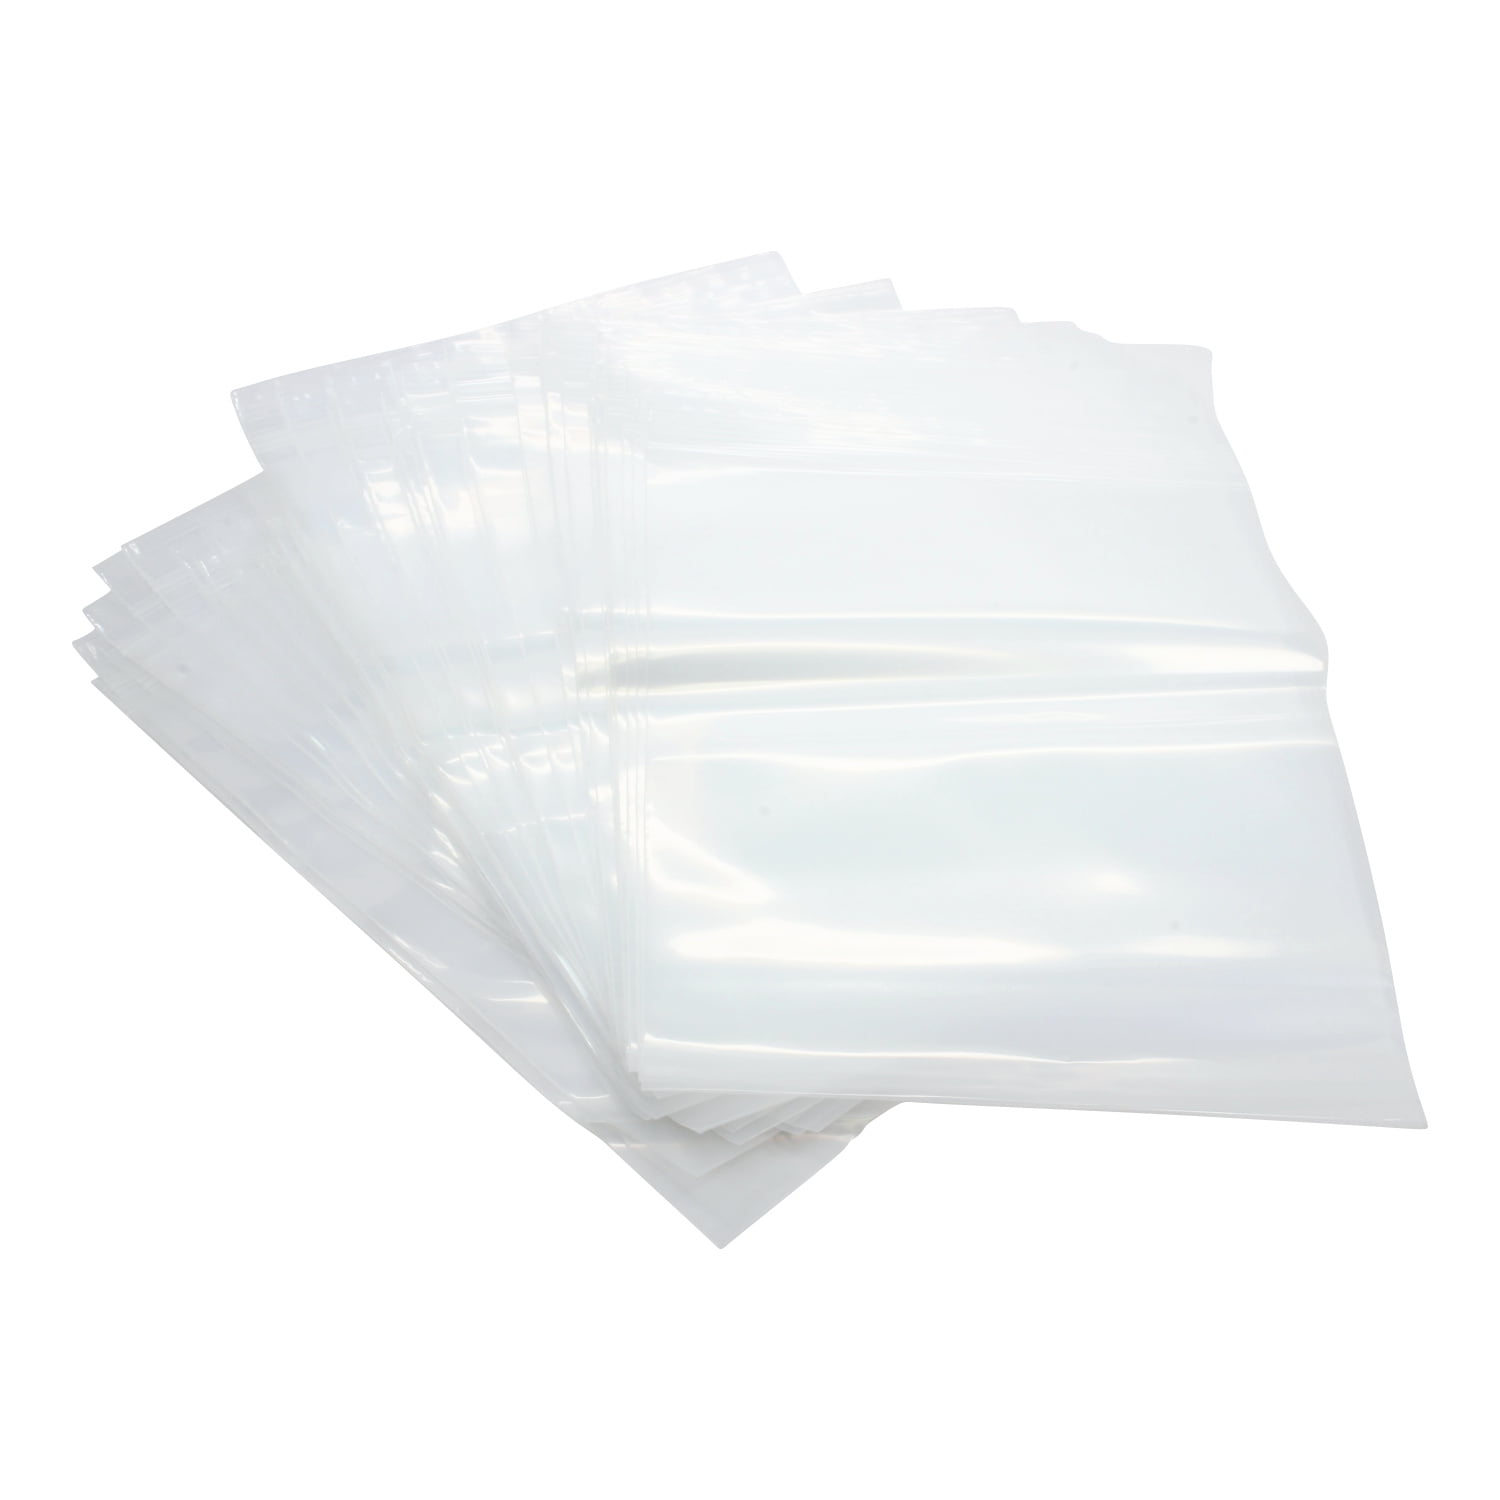 500/Case Reclosable 4 Mil Poly Bags Clear 8 x 30 